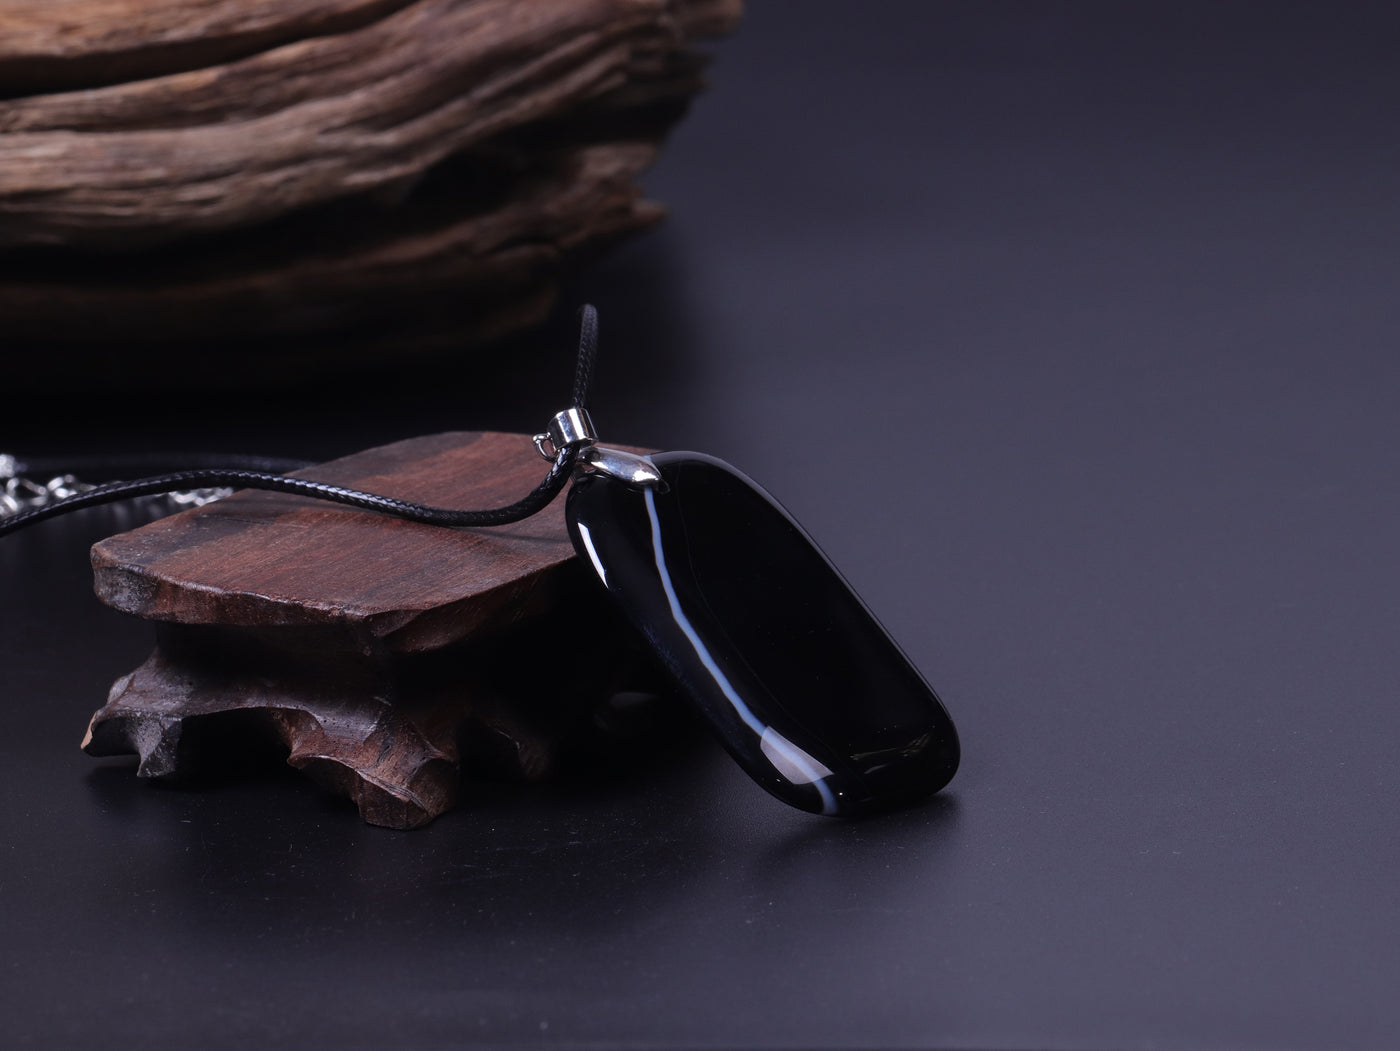 Black Striped Agate Necklace of Strength